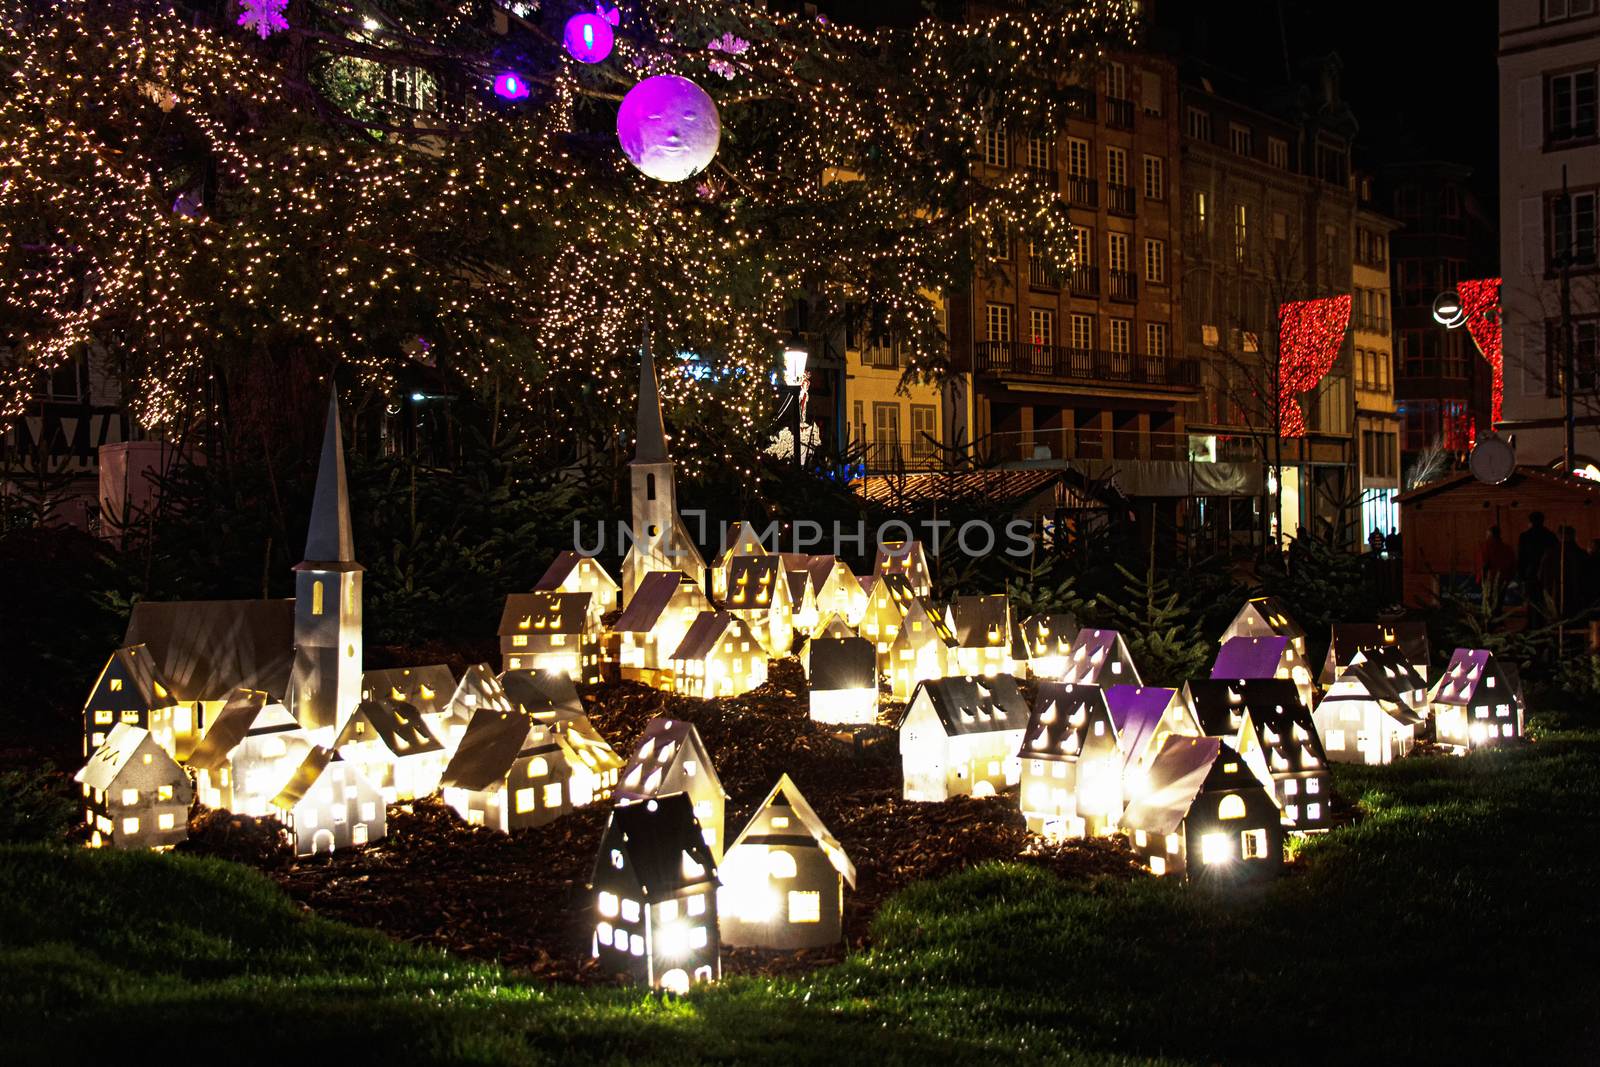 Illuminated of an Alsacian architectural village display in the Strasbourg Christmas market at night , on Klebar central city place, France